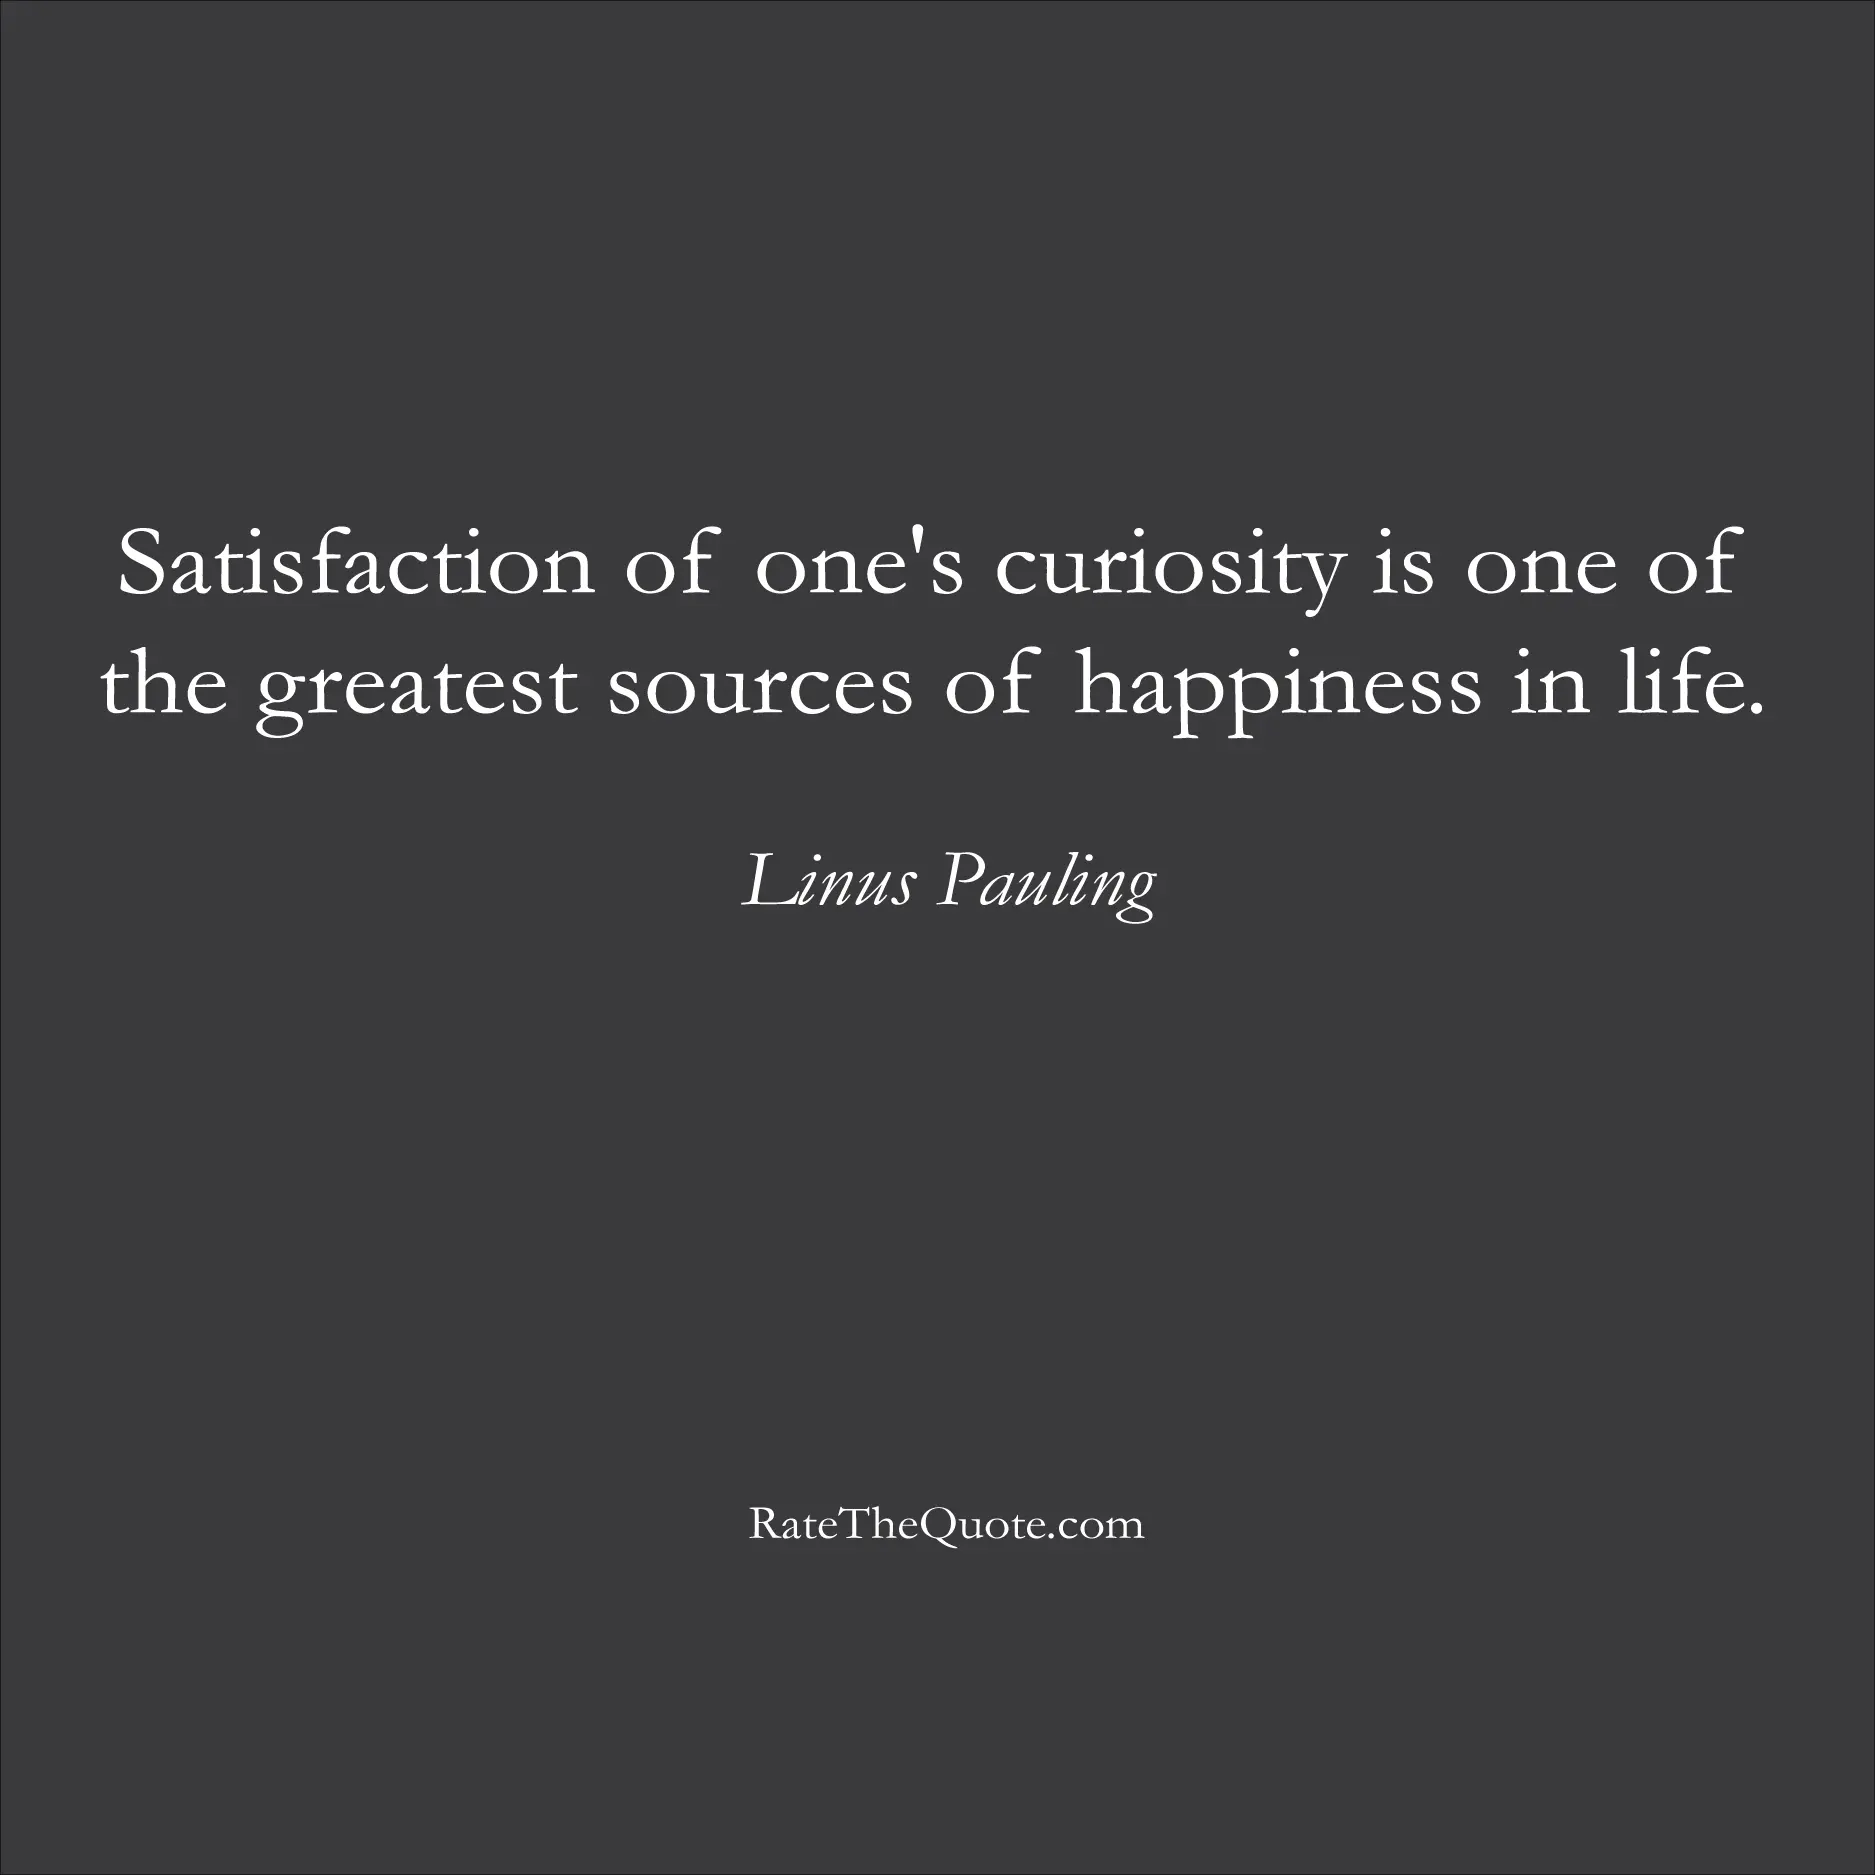 Happiness Quotes Satisfaction of one's curiosity is one of the greatest sources of happiness in life. Linus Pauling